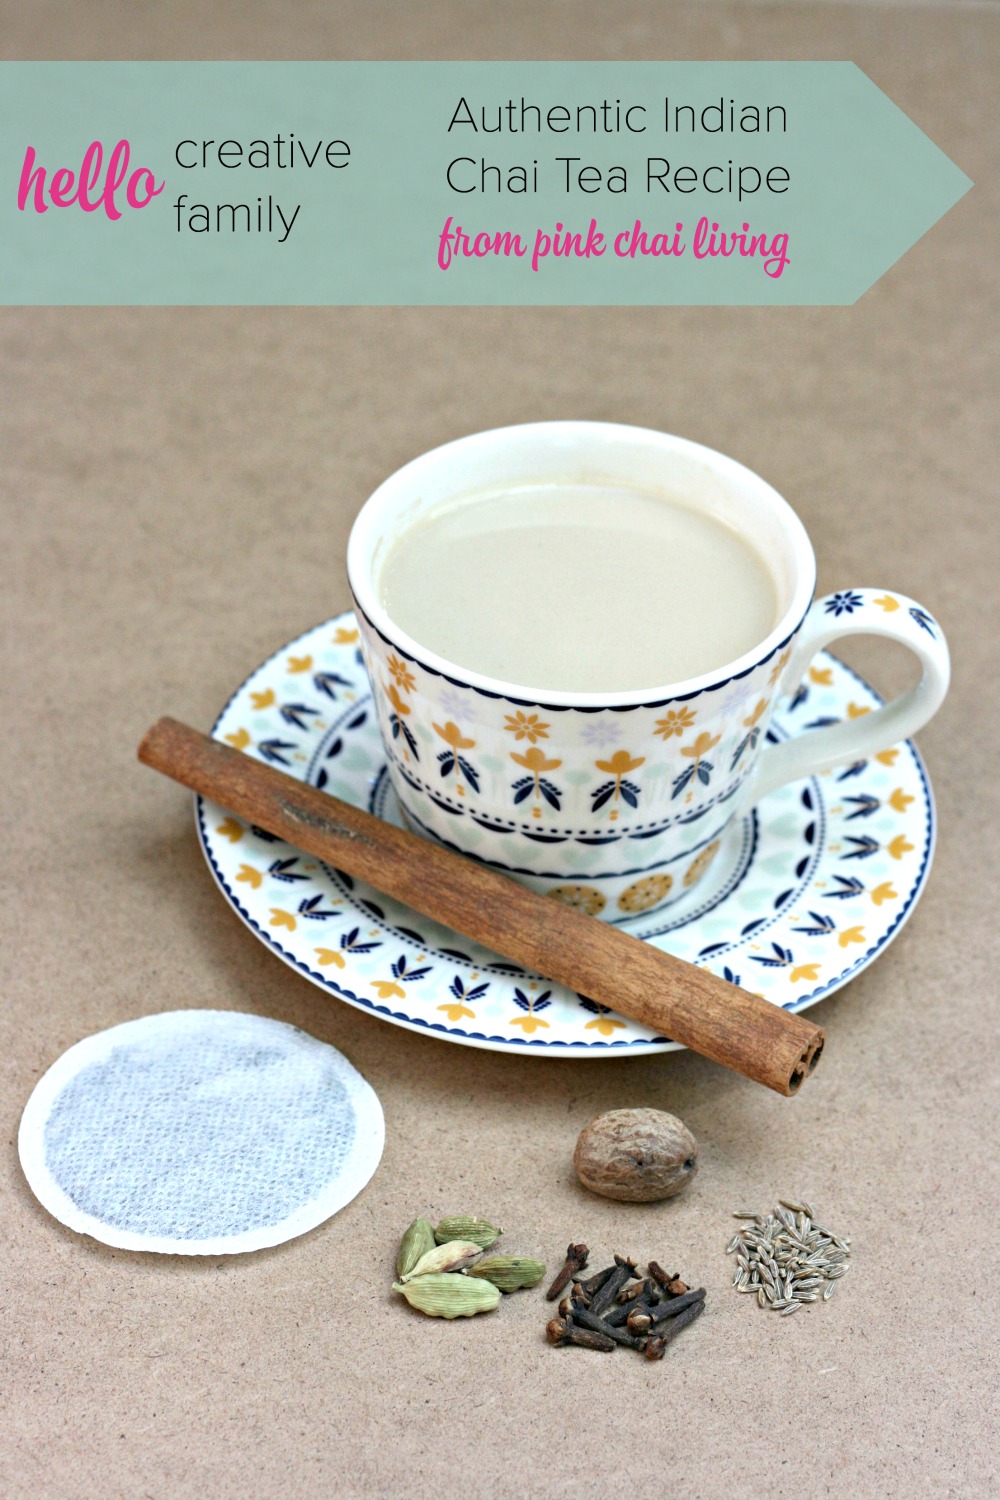 Looking for the perfect cup of chai tea Check out this authentic North India Masala Chai Tea Recipe. It's simple and delicious!